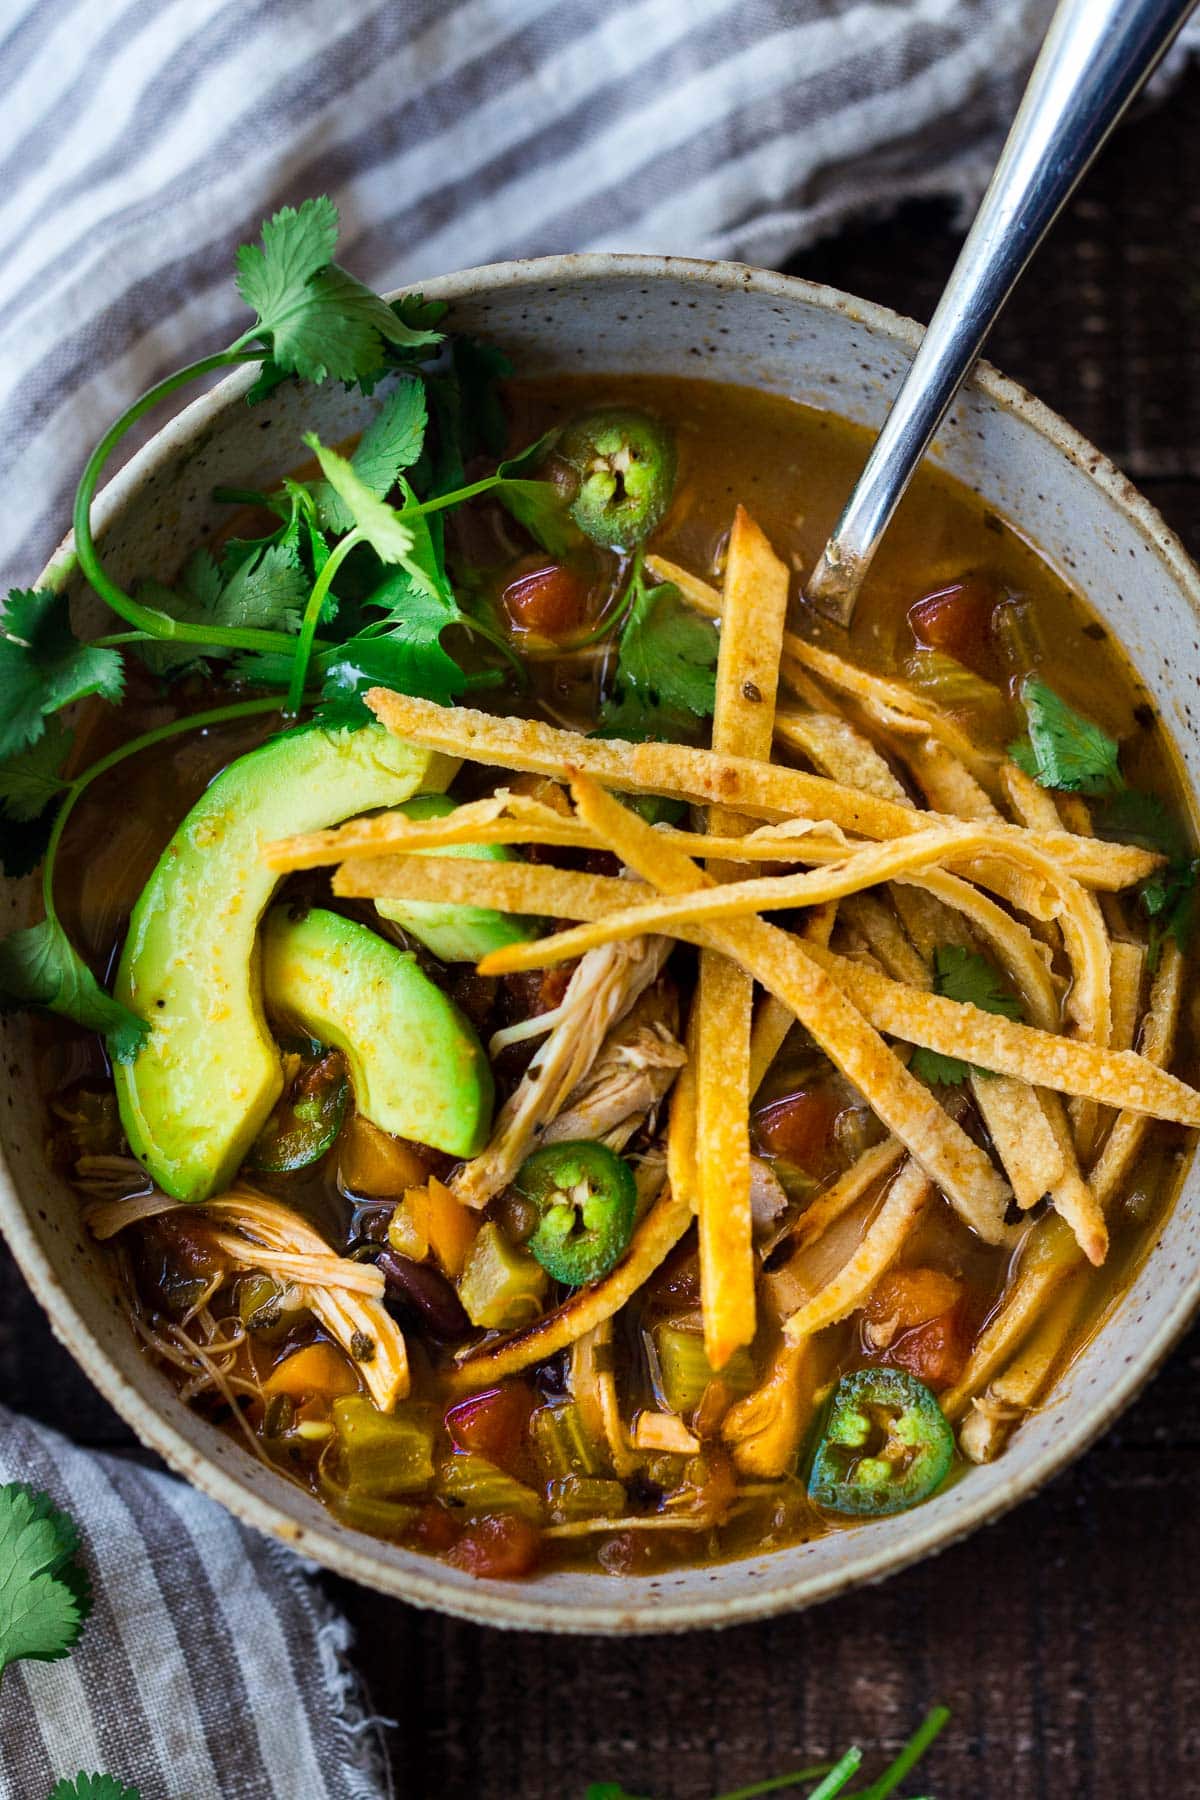 This Chicken Tortilla Soup is one of BEST recipes on the blog and hands-down one of our favorite dinners. Delicious and healthy, loaded with chicken and veggies, this soup will warm you to your bones! Make it in an Instant pot, on the stovetop, or in a slow cooker!